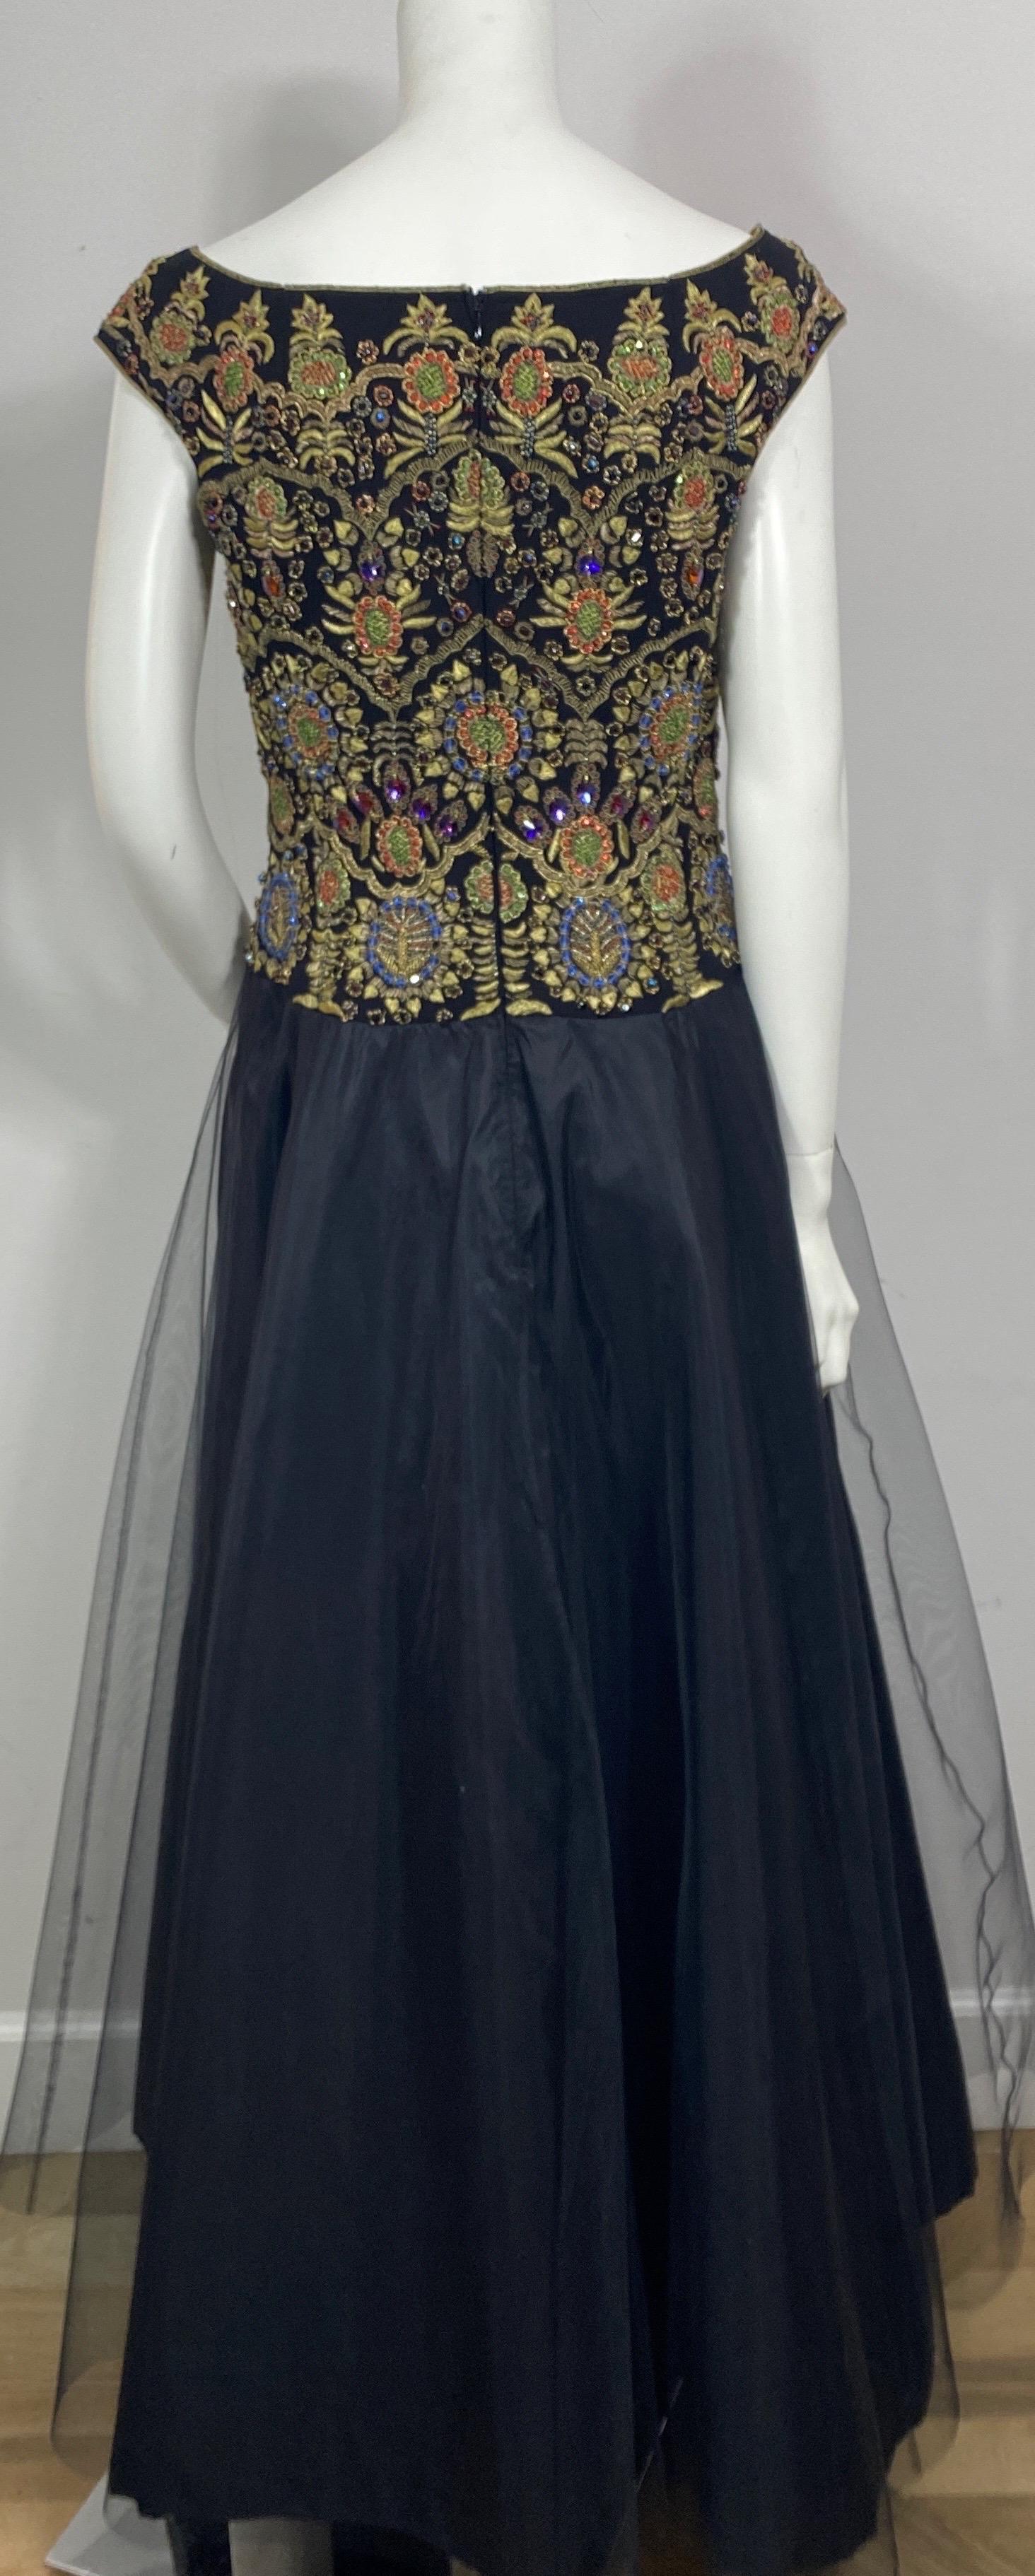 Escada 1990’s Black Silk and Tulle Gown w/ Heavily Beaded Bodice - Size 38 For Sale 8